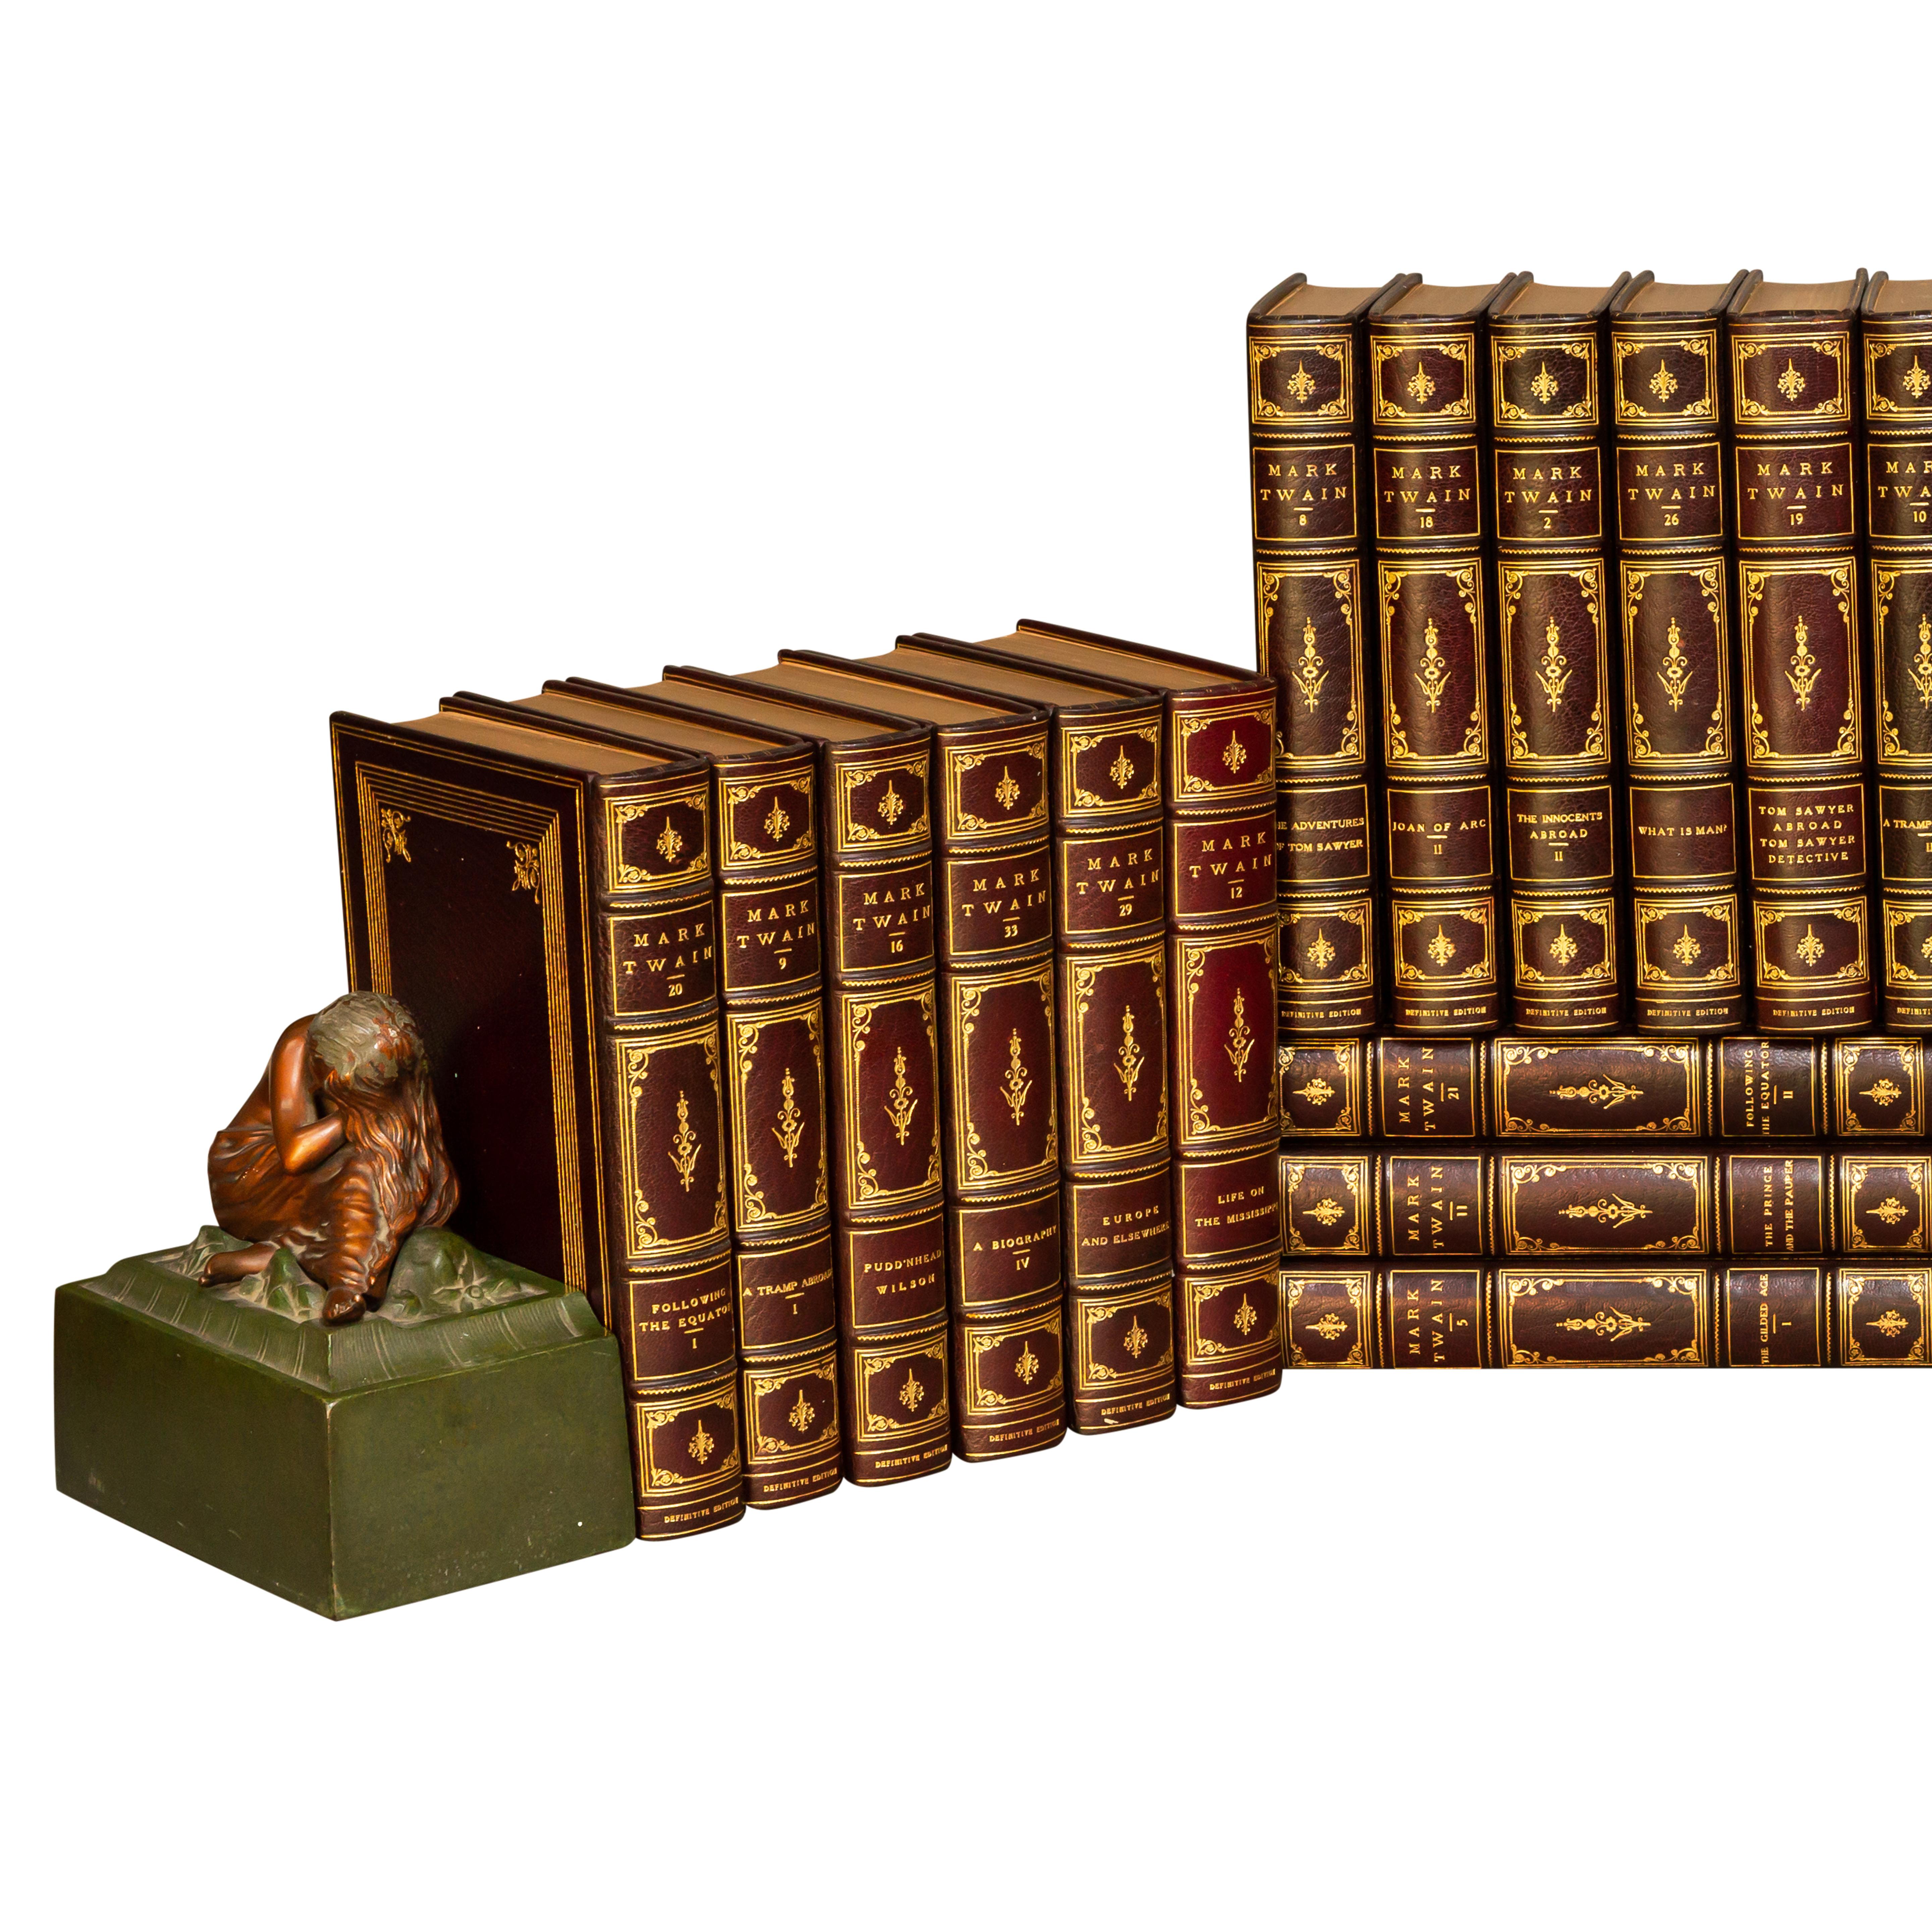 37 Volumes. 
“Definitive Edition” Limited to 1024 Sets, The First Volume of Each bearing the original autograph signature of Mark Twain, This is #855.
Bound in full wine Morocco, top edges gilt, raised bands, gilt on covers and spines,
Marbled